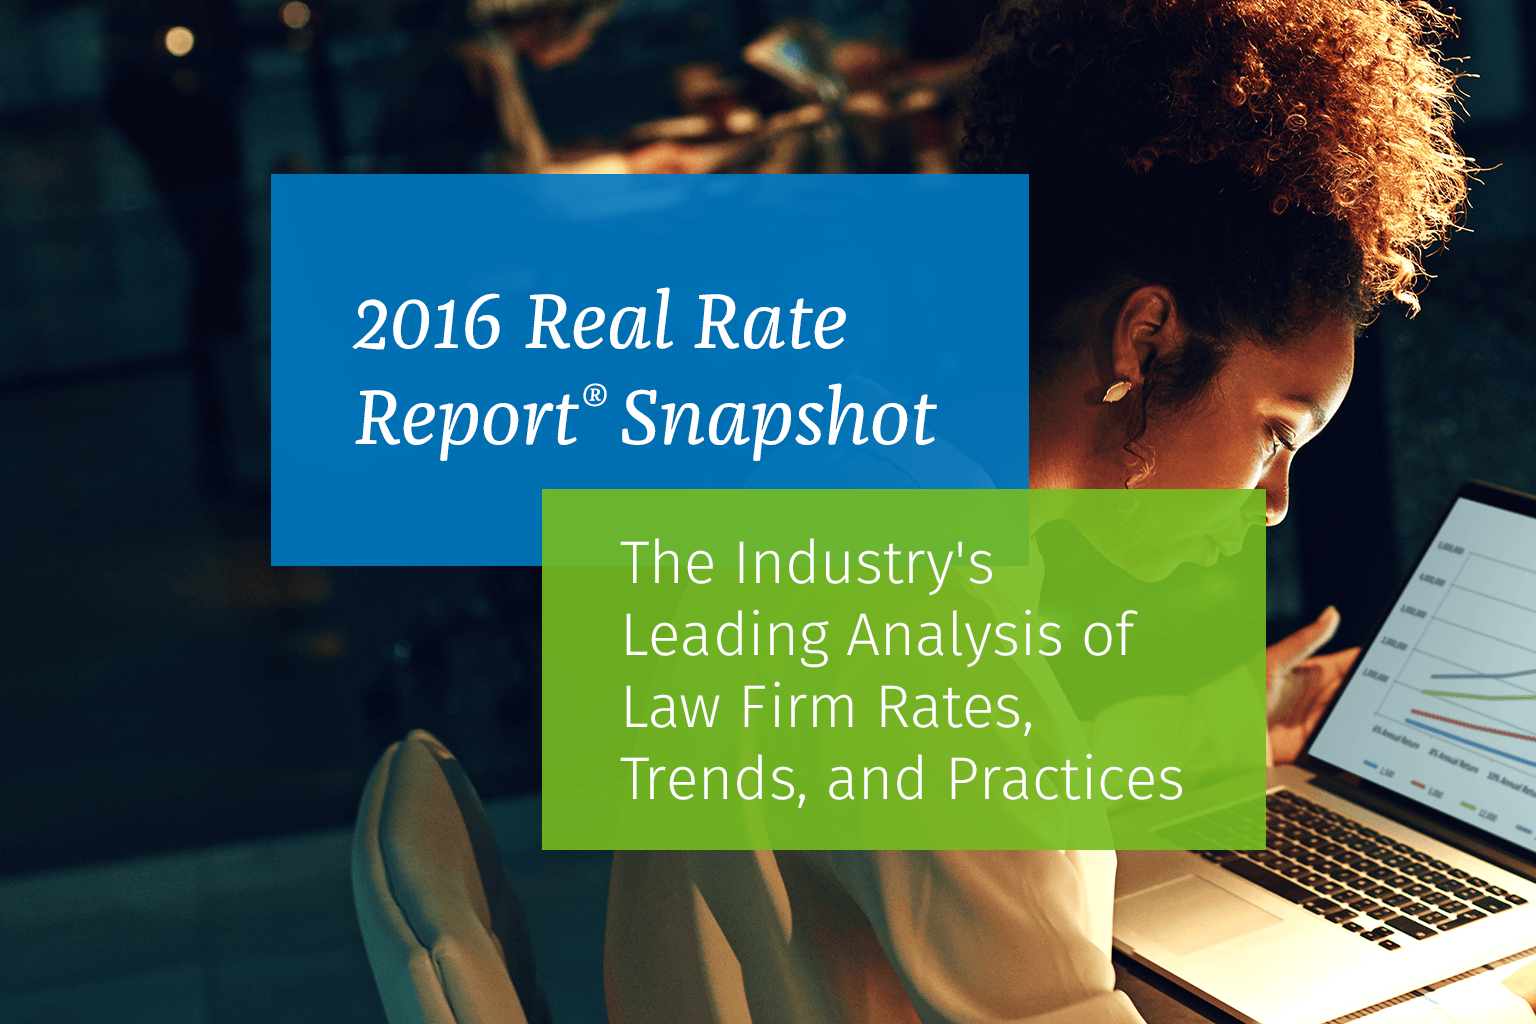 Real Rate Report